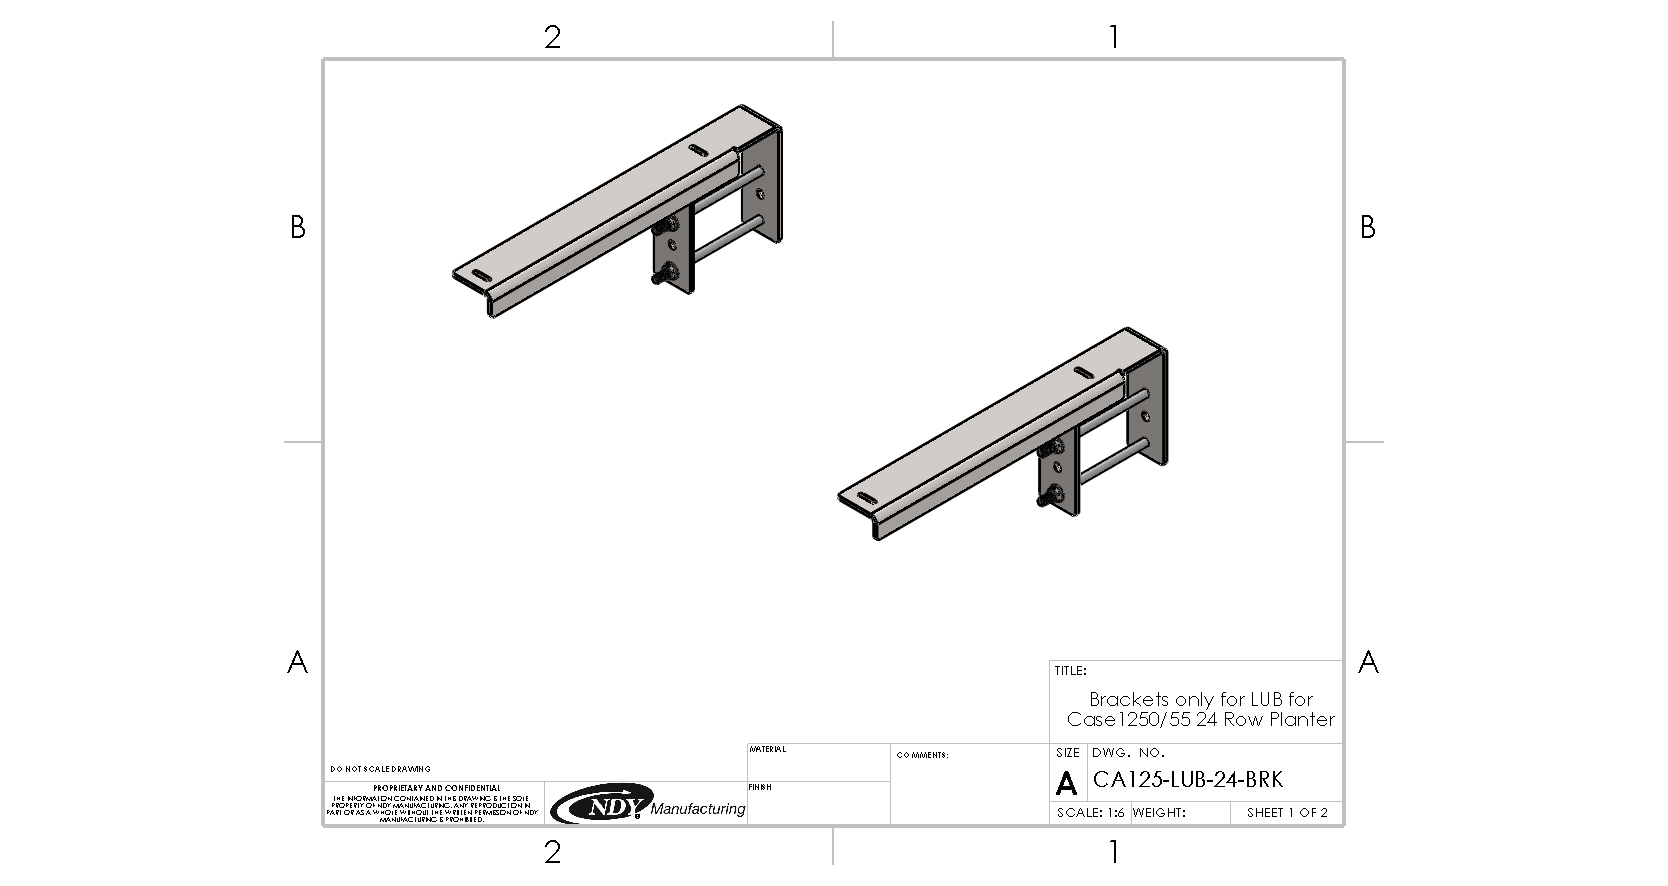 A drawing of Large Utility Storage Box Brackets for 24 row 30" Case IH 1250/1255 Planters for a door.